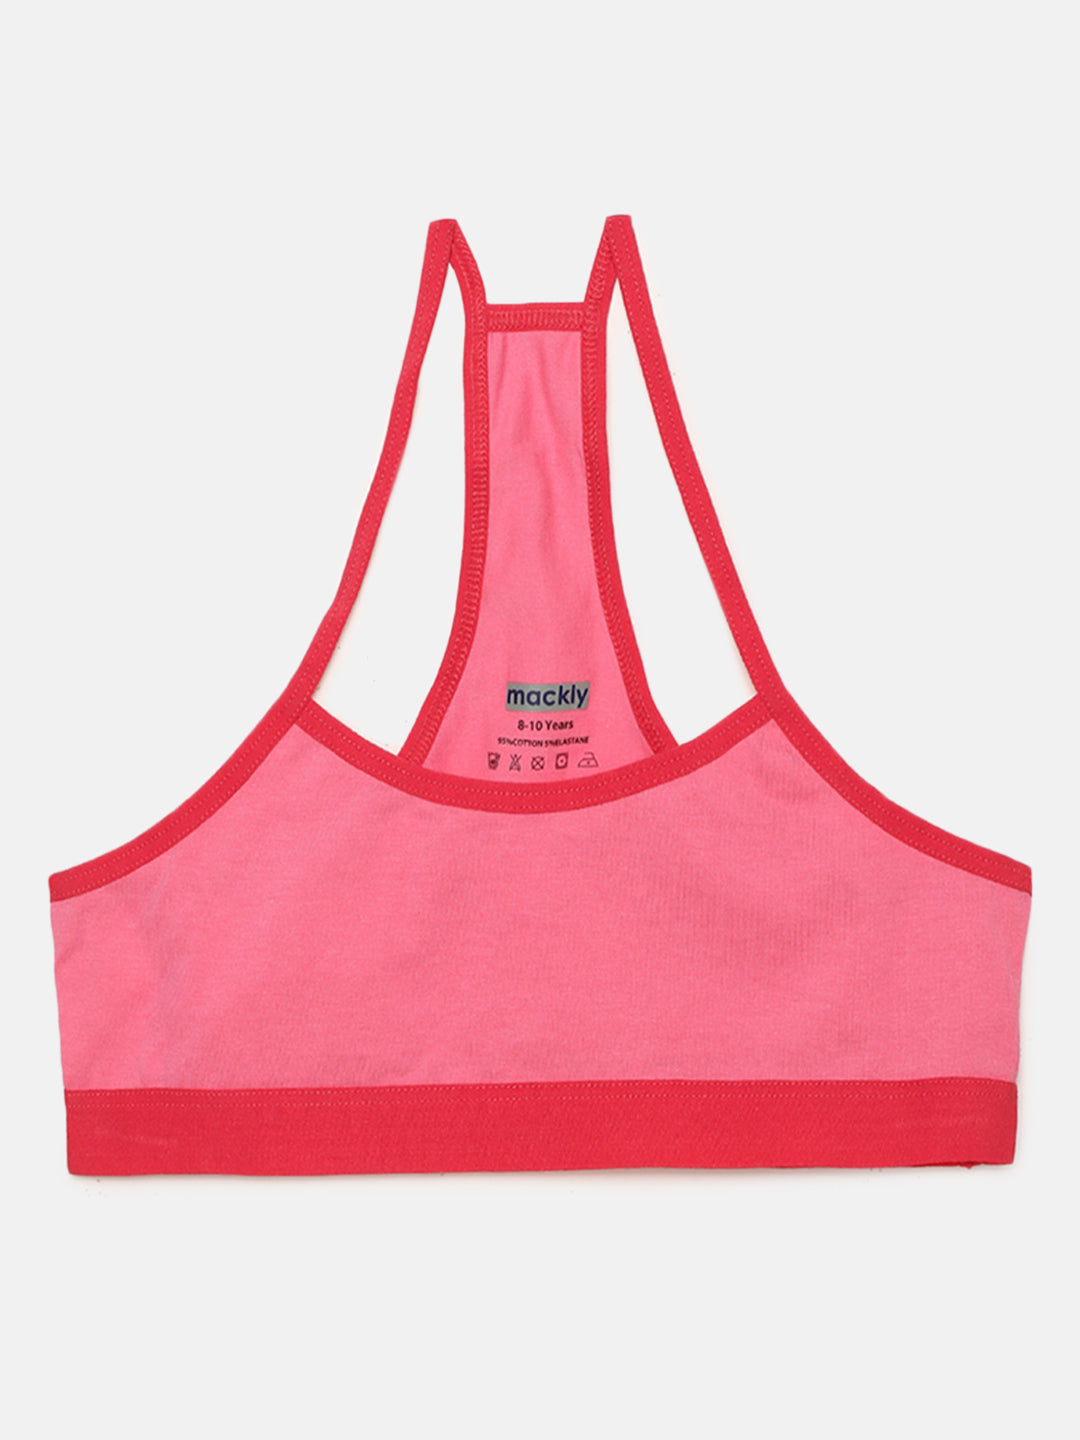 Racer Back Trainer Bra with Red Border - Pink